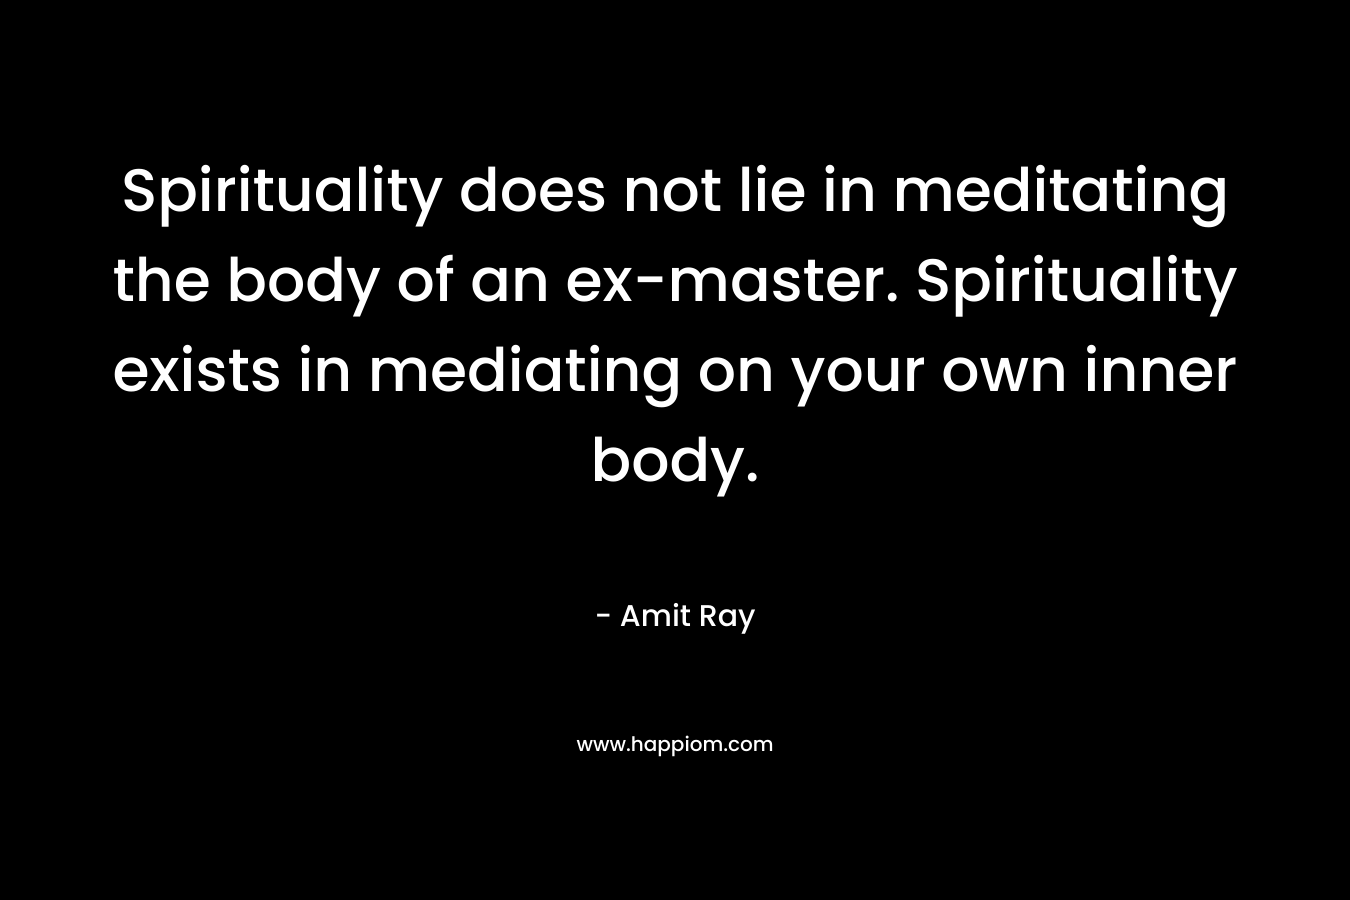 Spirituality does not lie in meditating the body of an ex-master. Spirituality exists in mediating on your own inner body.